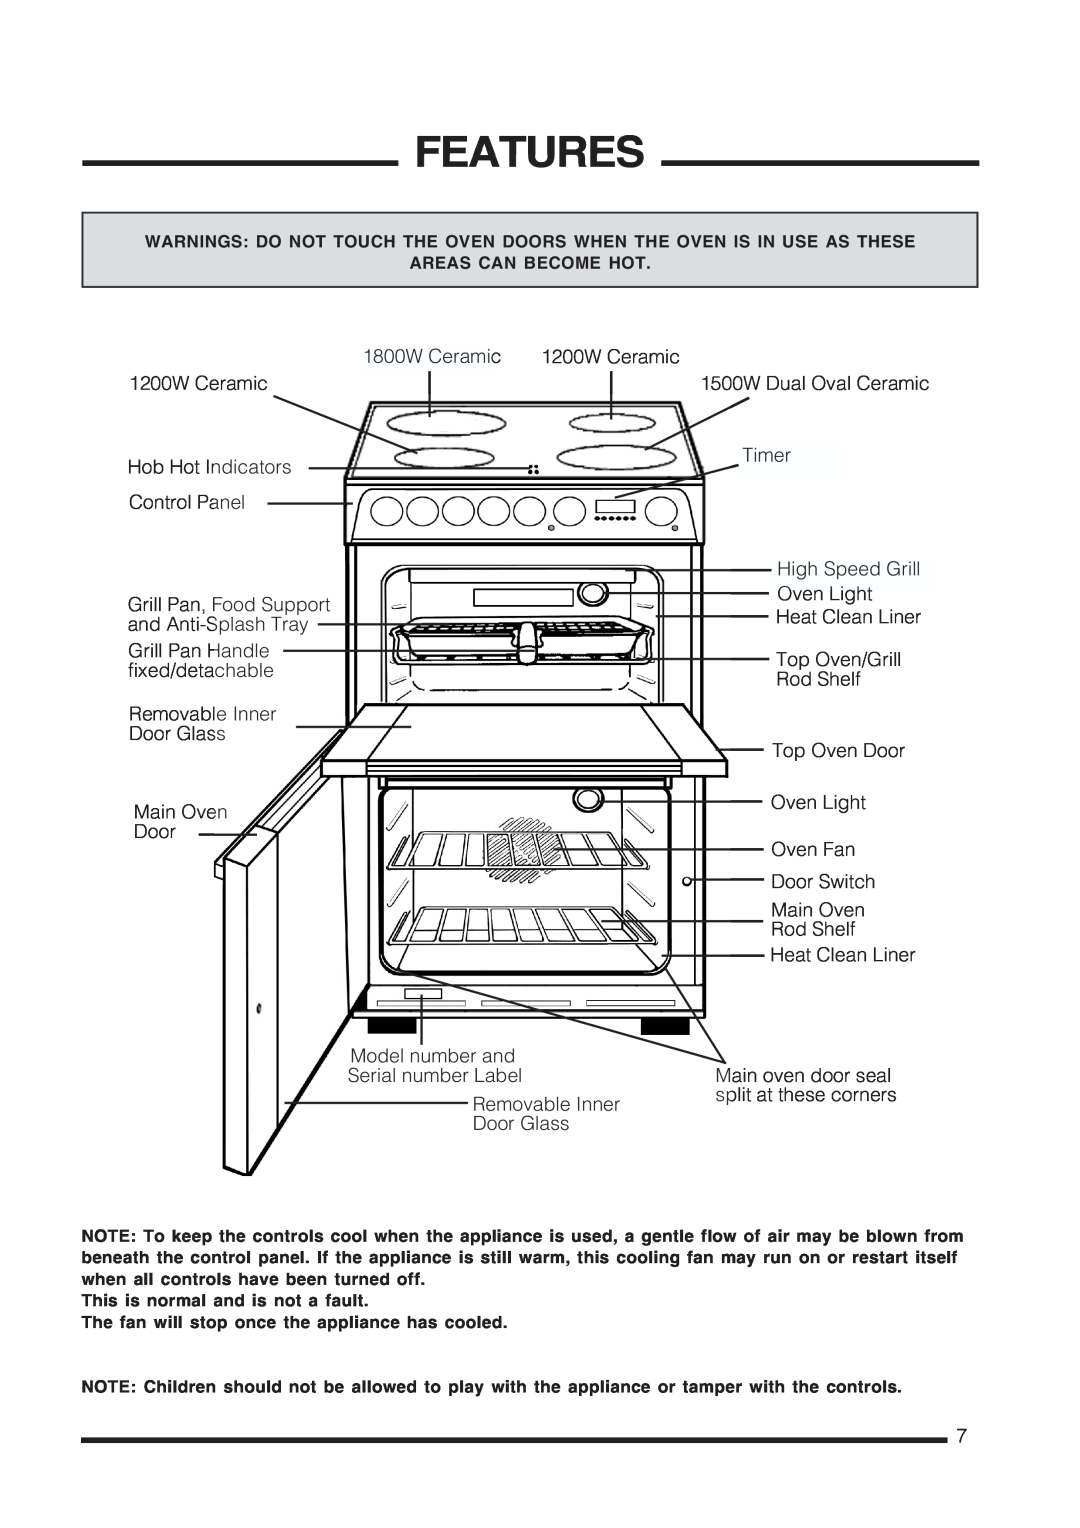 Cannon Pressure Cookers manual Features 